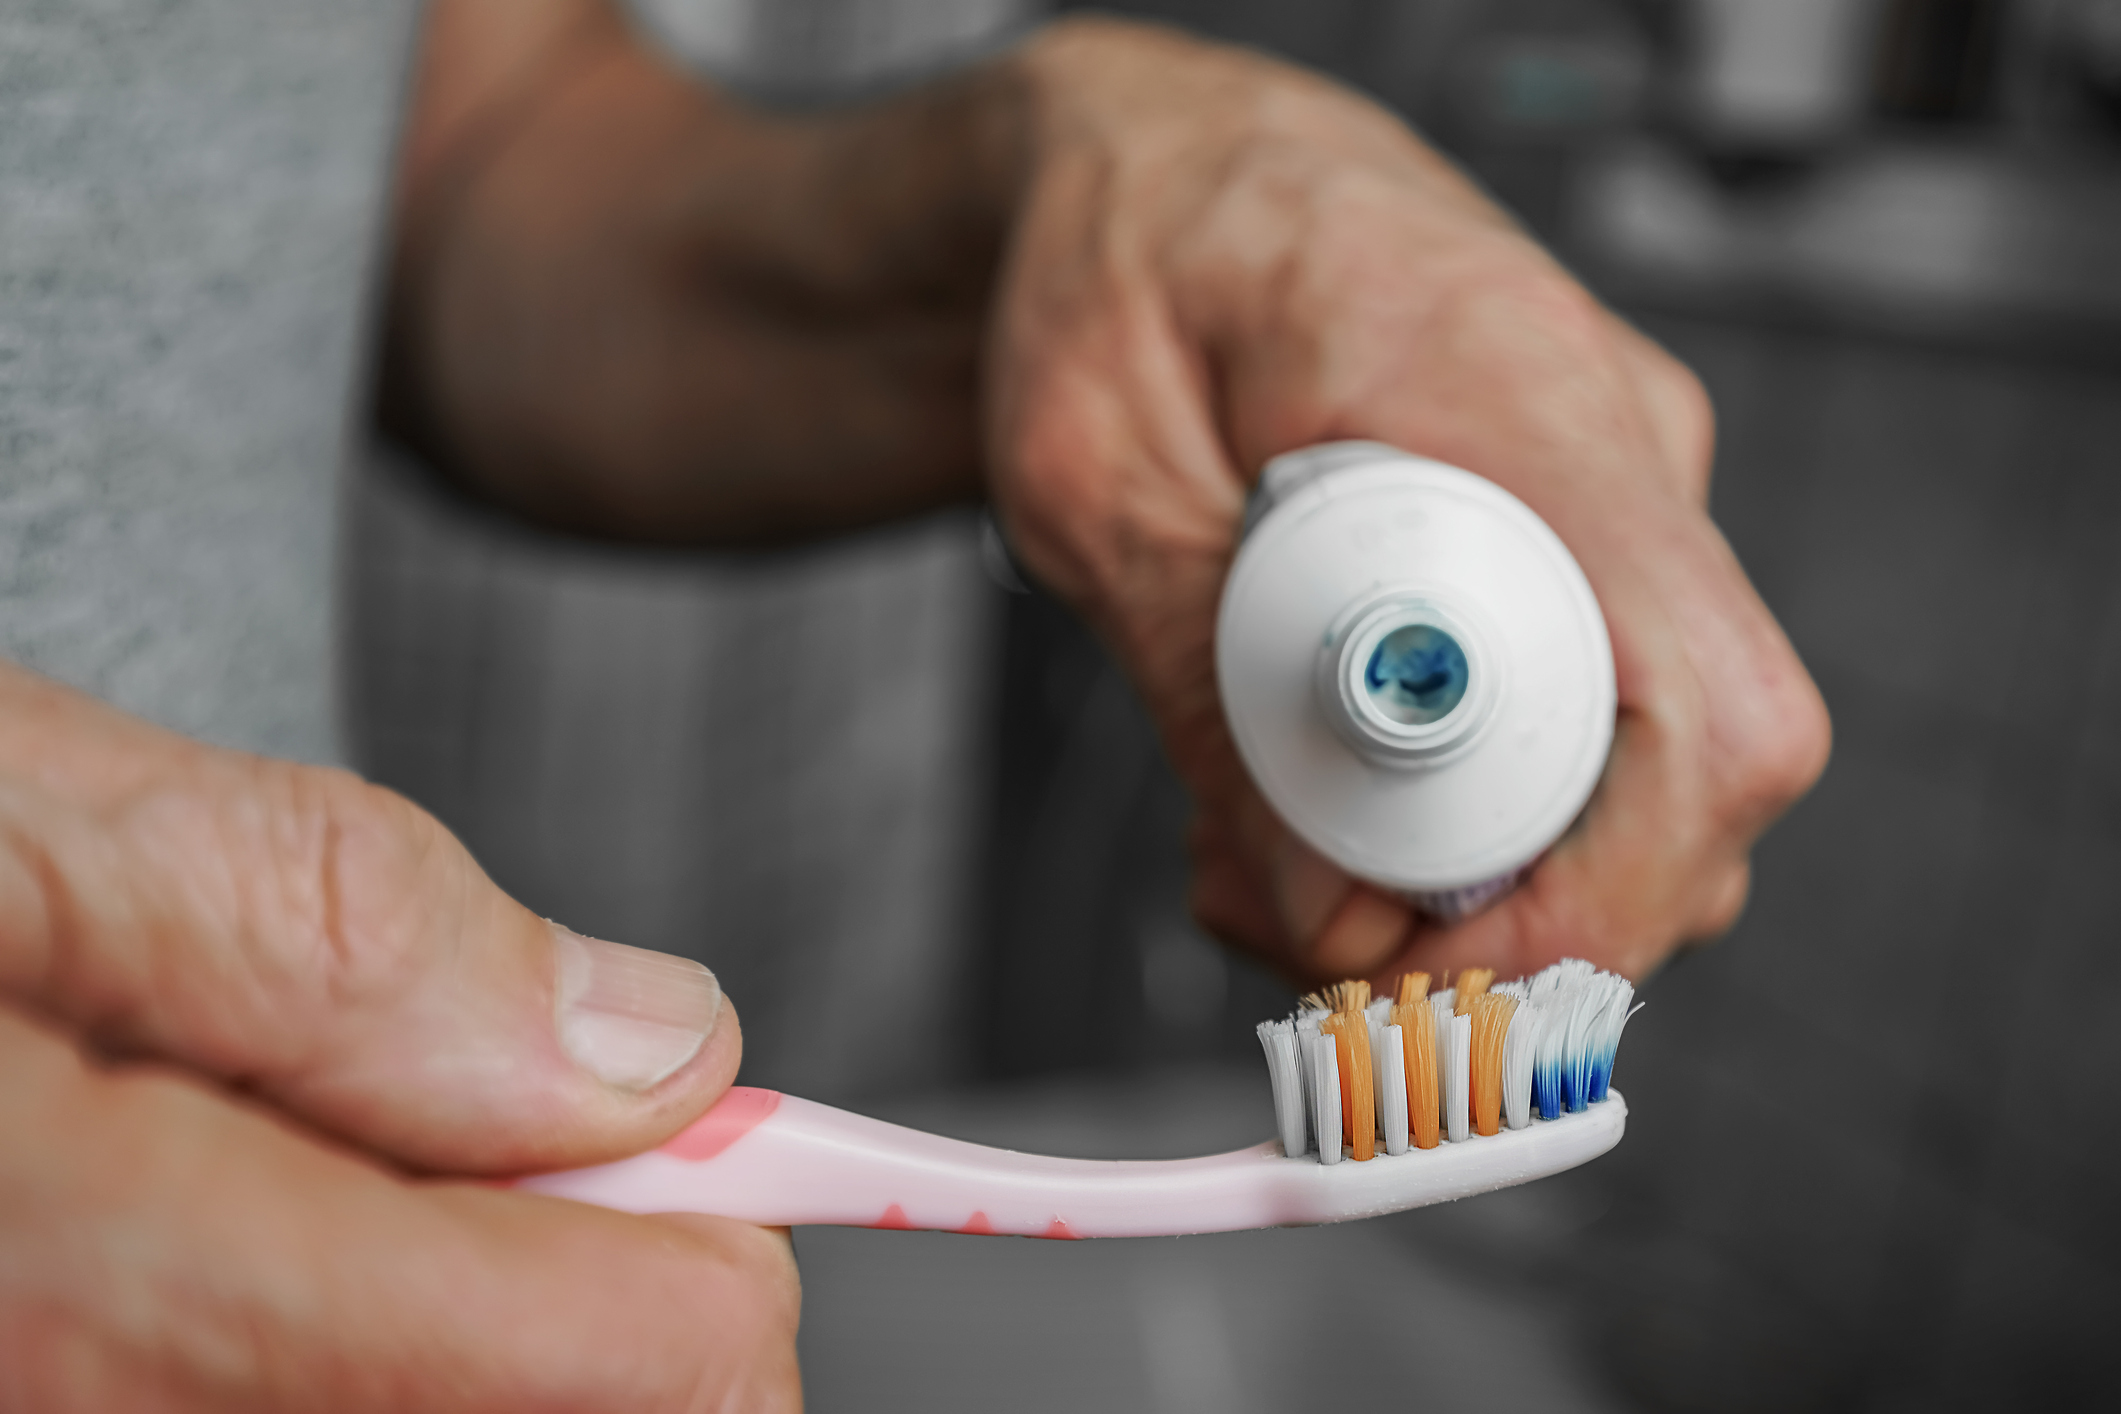 The link between your toothbrush and silent brain damage